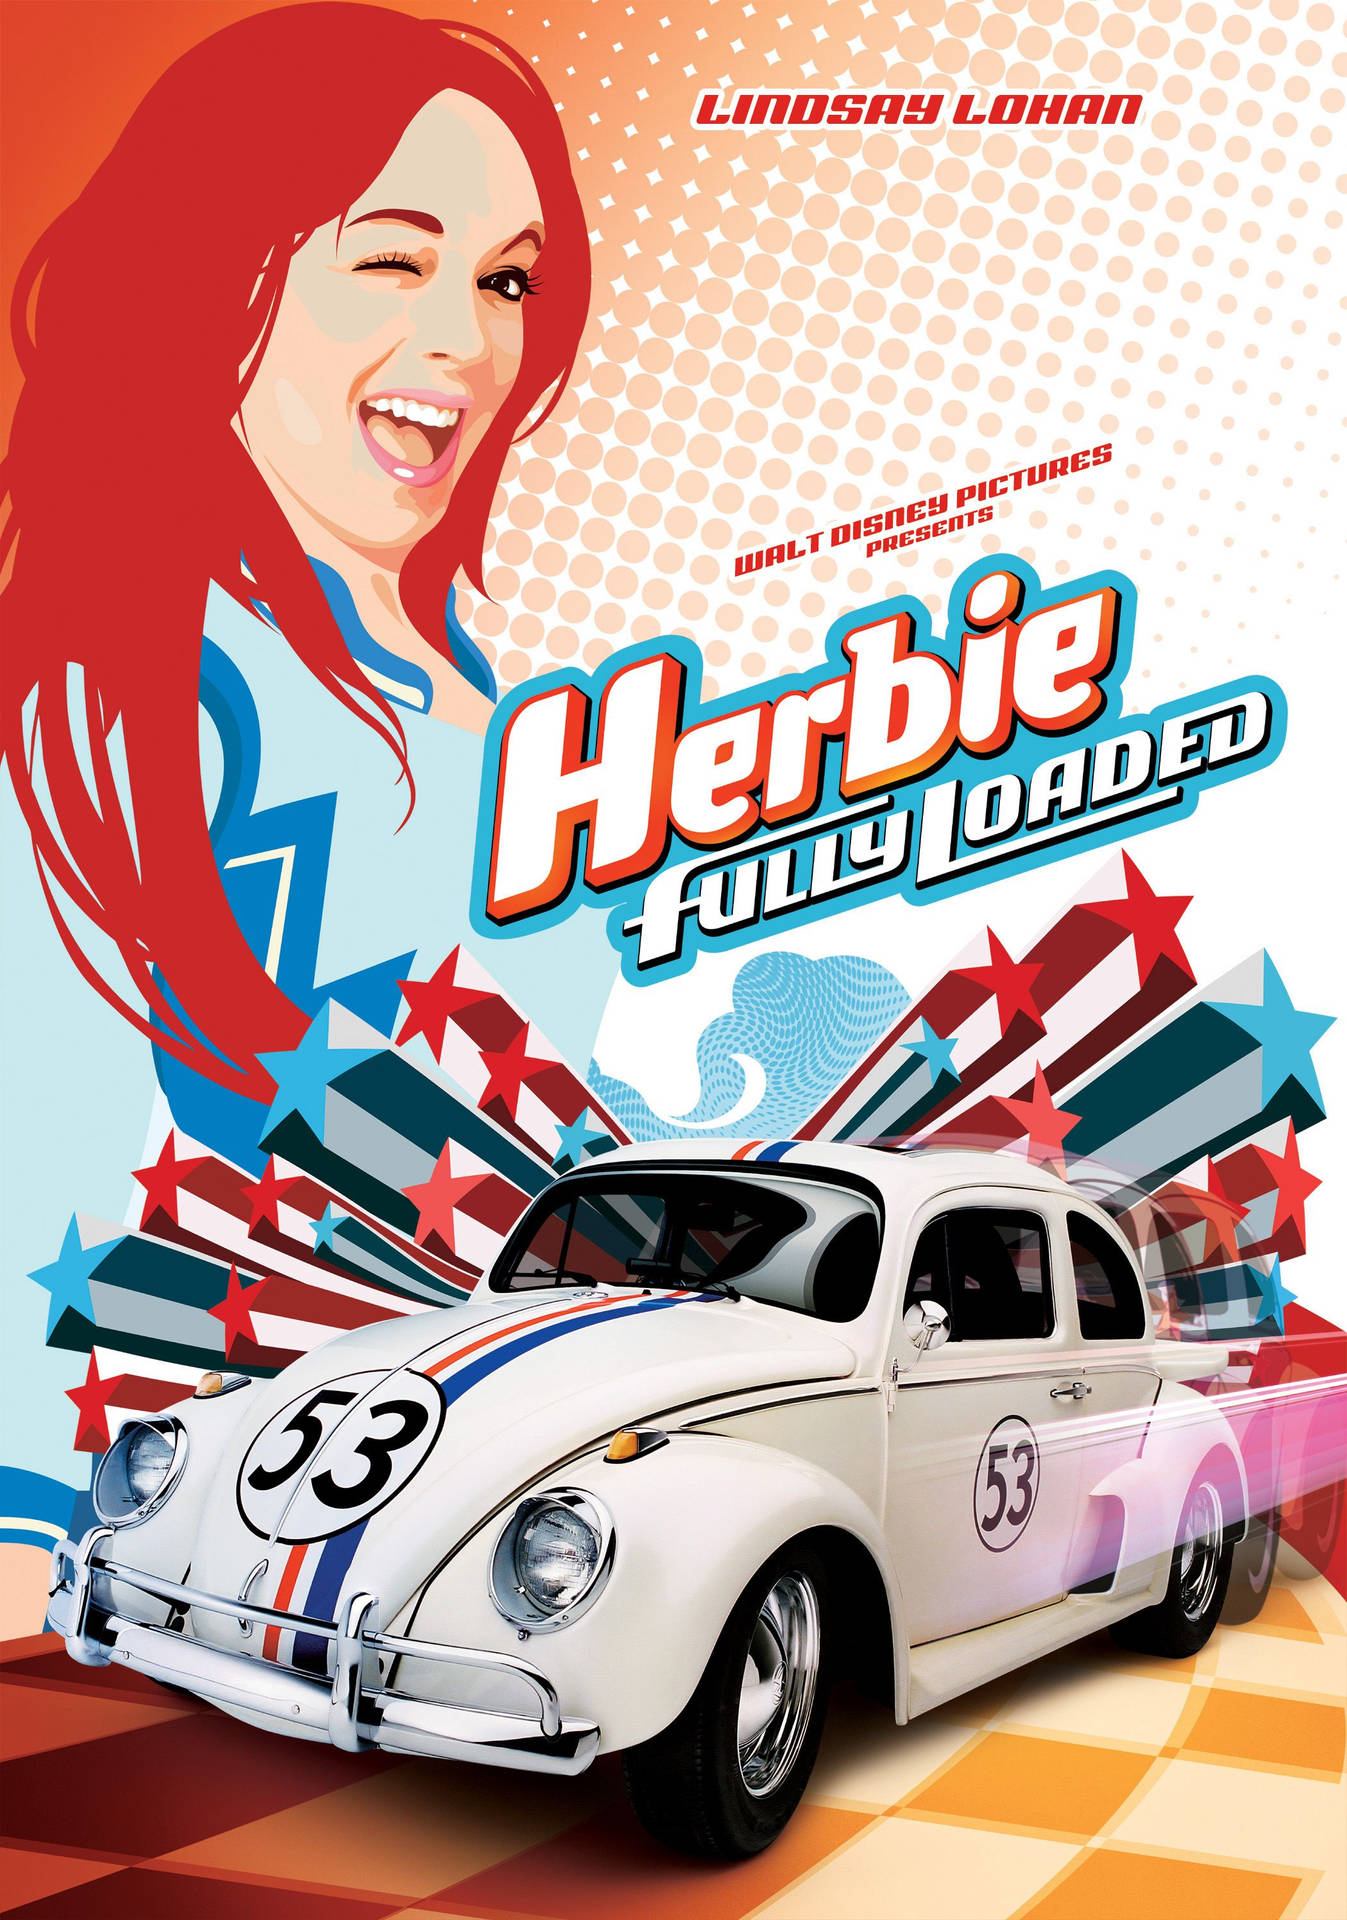 Lindsay Lohan With Herbie In Herbie Fully Loaded Movie Poster Background